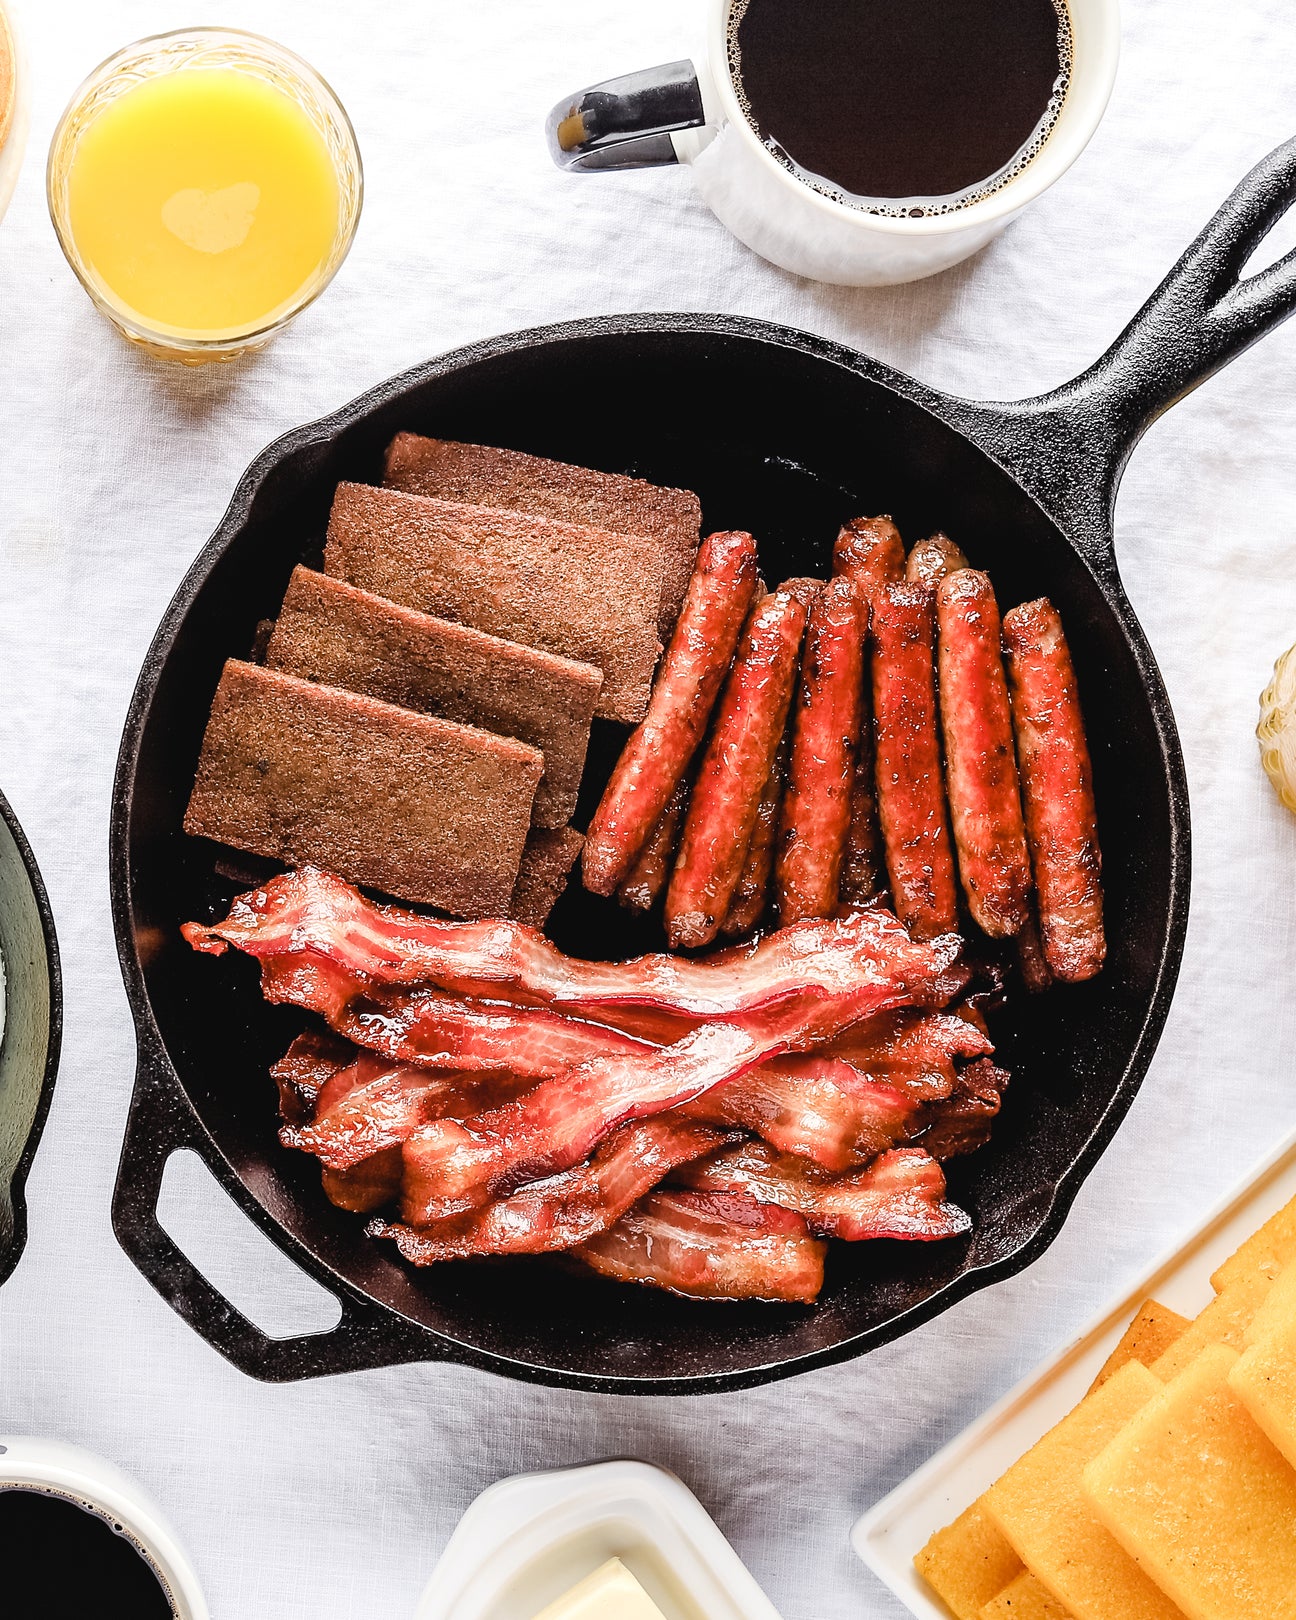 Scrapple bacon and sausage in a cast iron pan